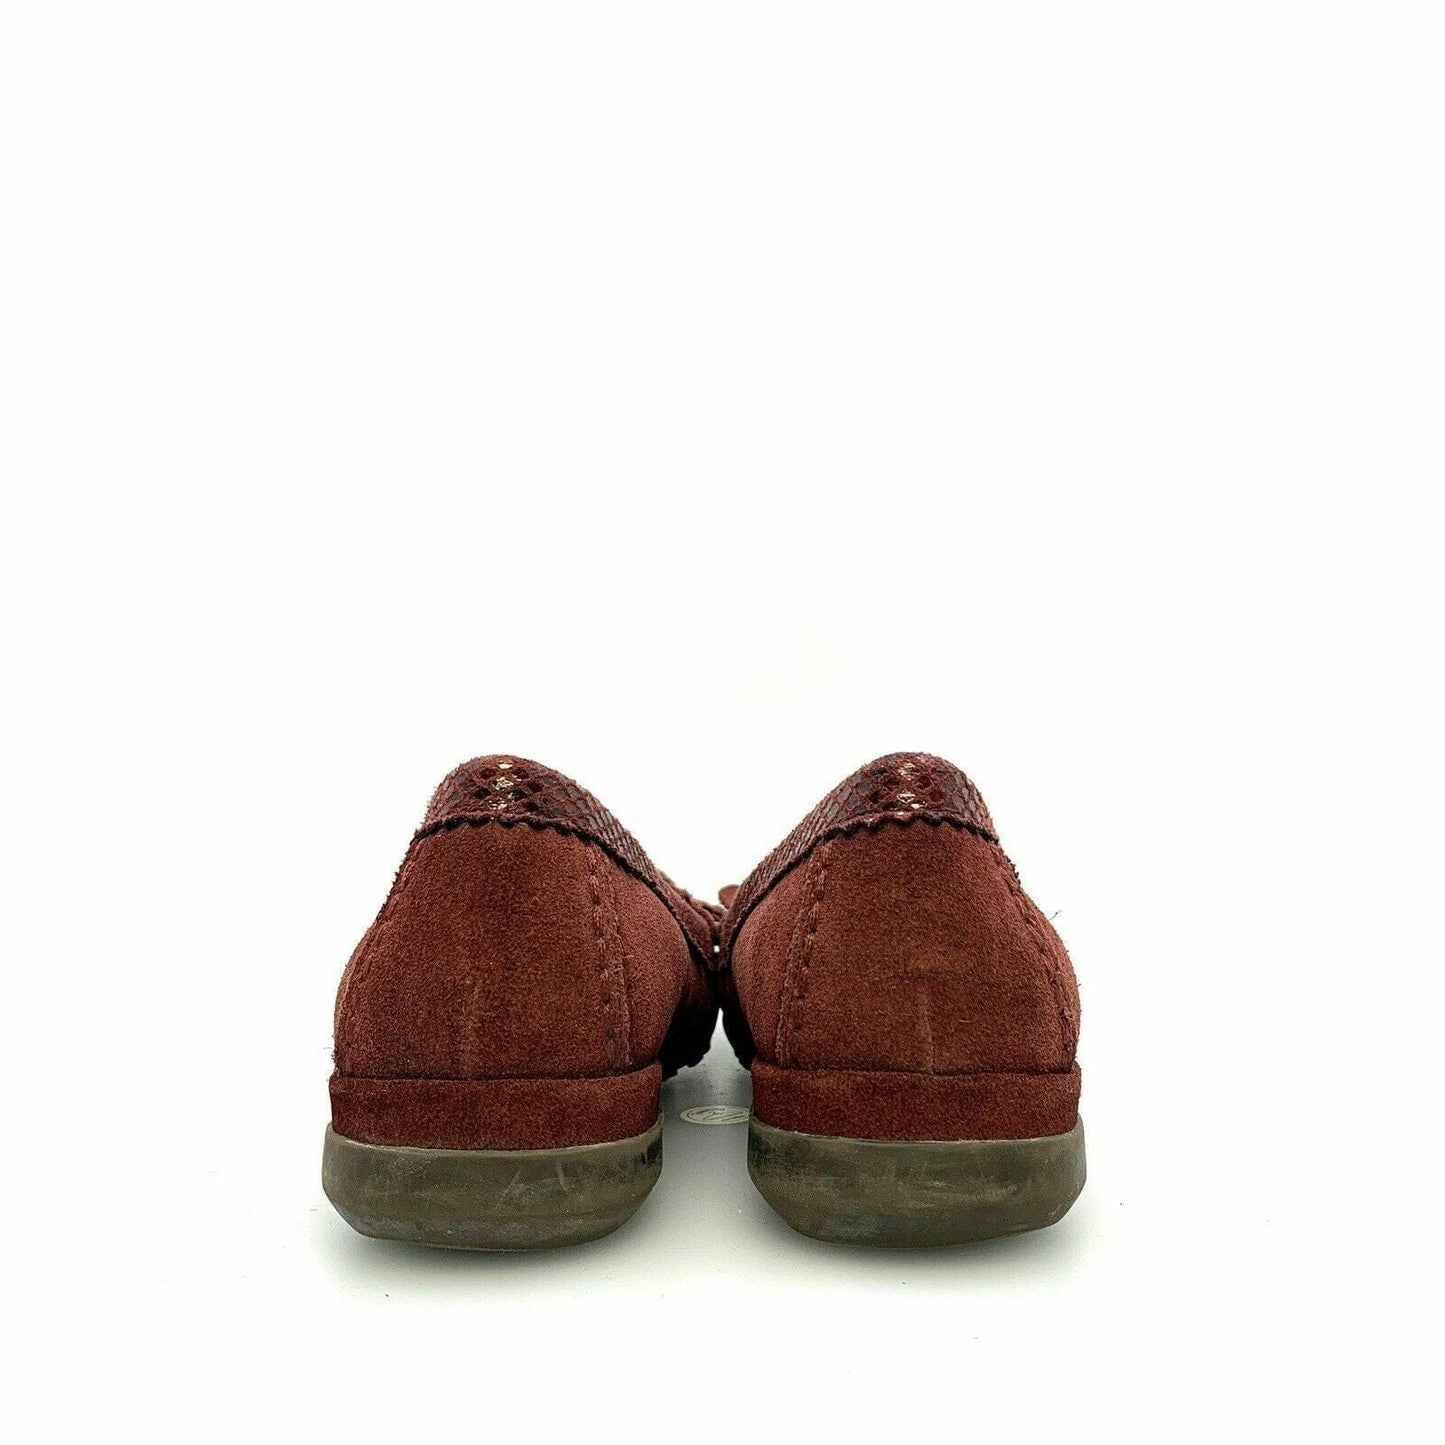 Naturalizer Womens Size 7.5N Brown Suede Leather Loafers Moccasin Flats Shoes